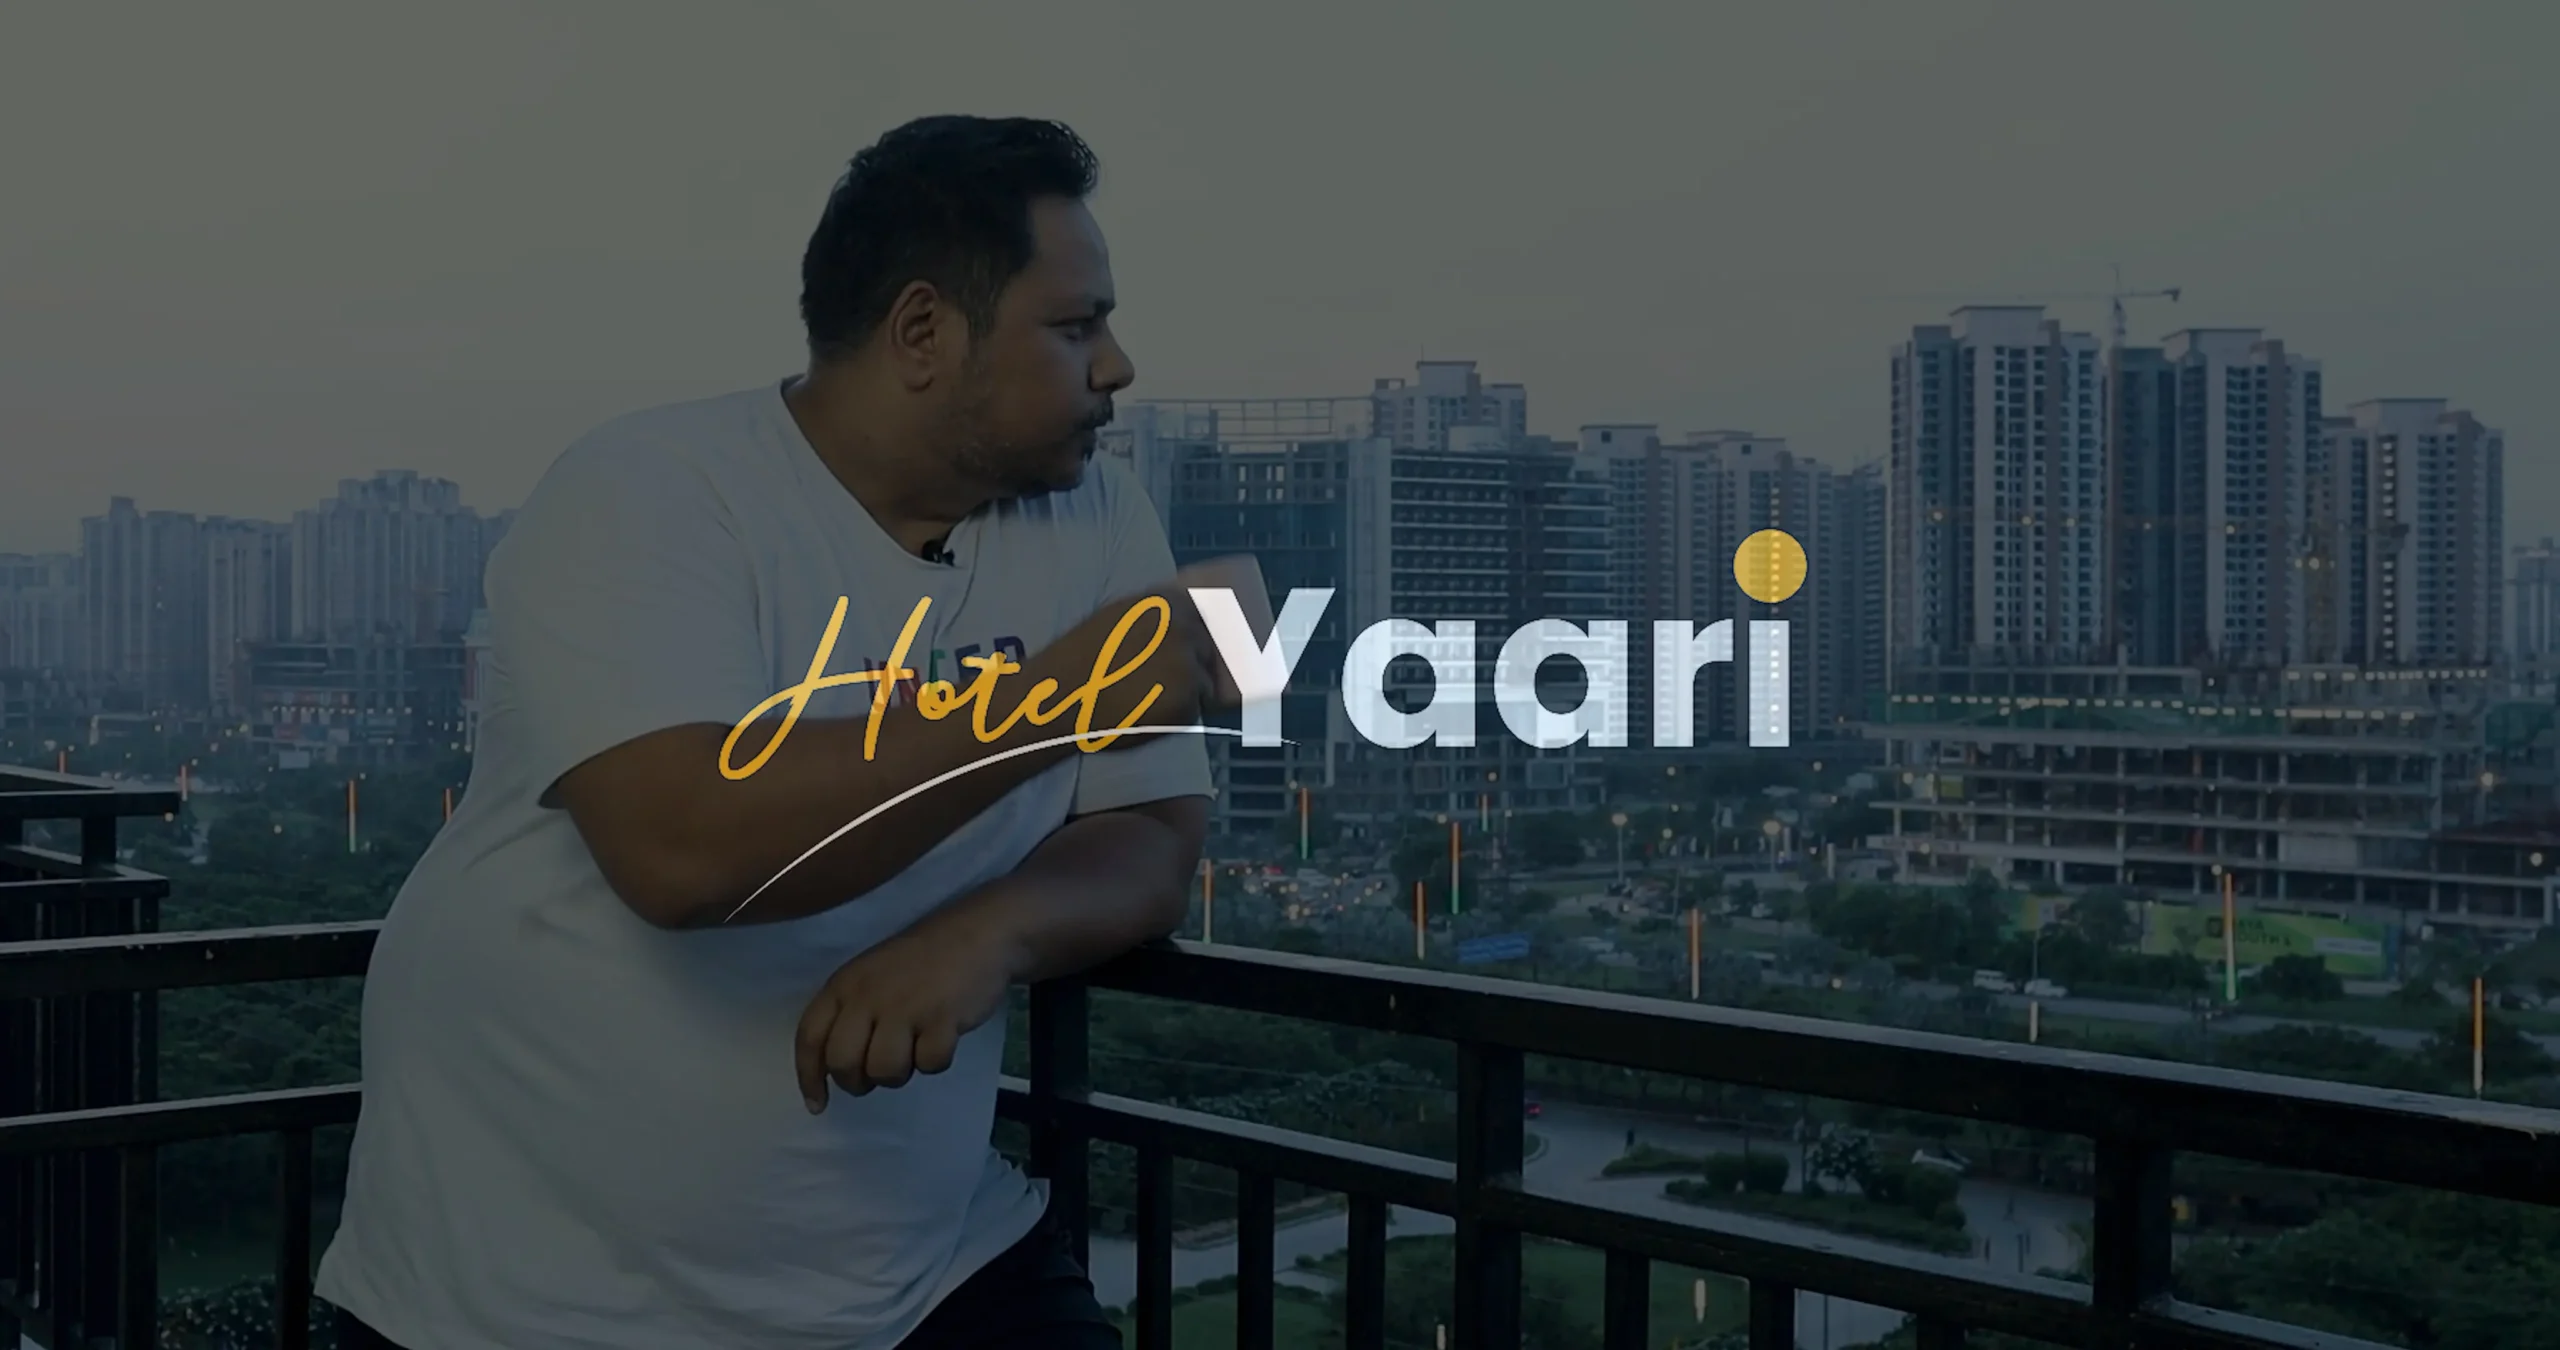 HotelYaari Secures $2.18 Million in Seed Funding from Alios Ventures for Fractional Ownership of Holiday Homes